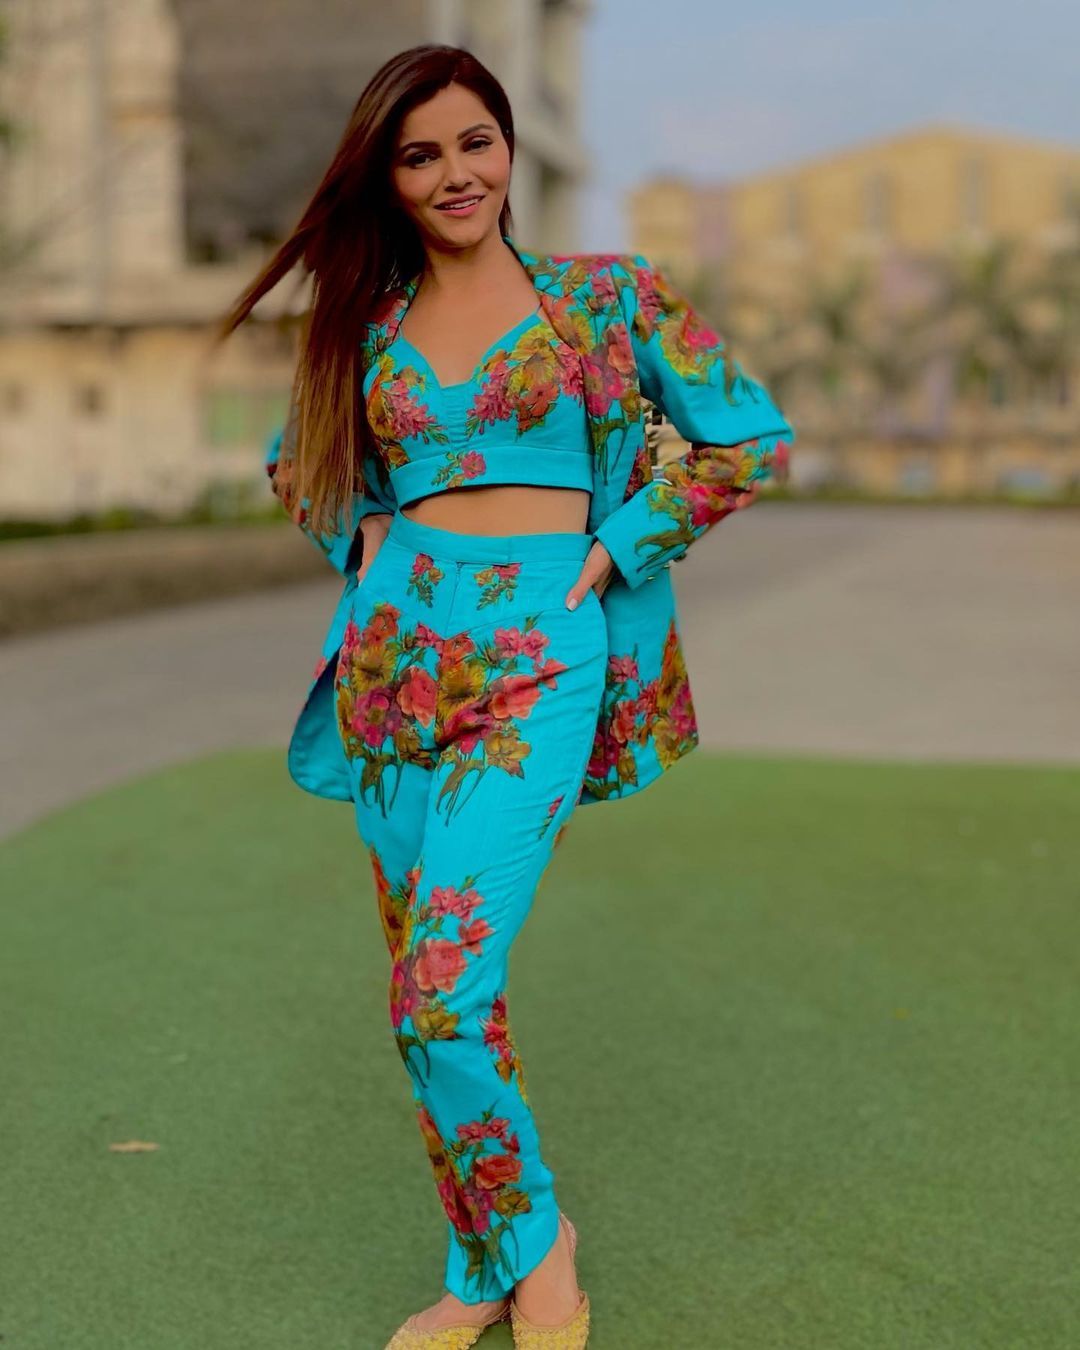 Rubina Dilaik Is Ecstatic That Her Sense Of Smell And Taste Has Returned Post COVID-19 Recovery